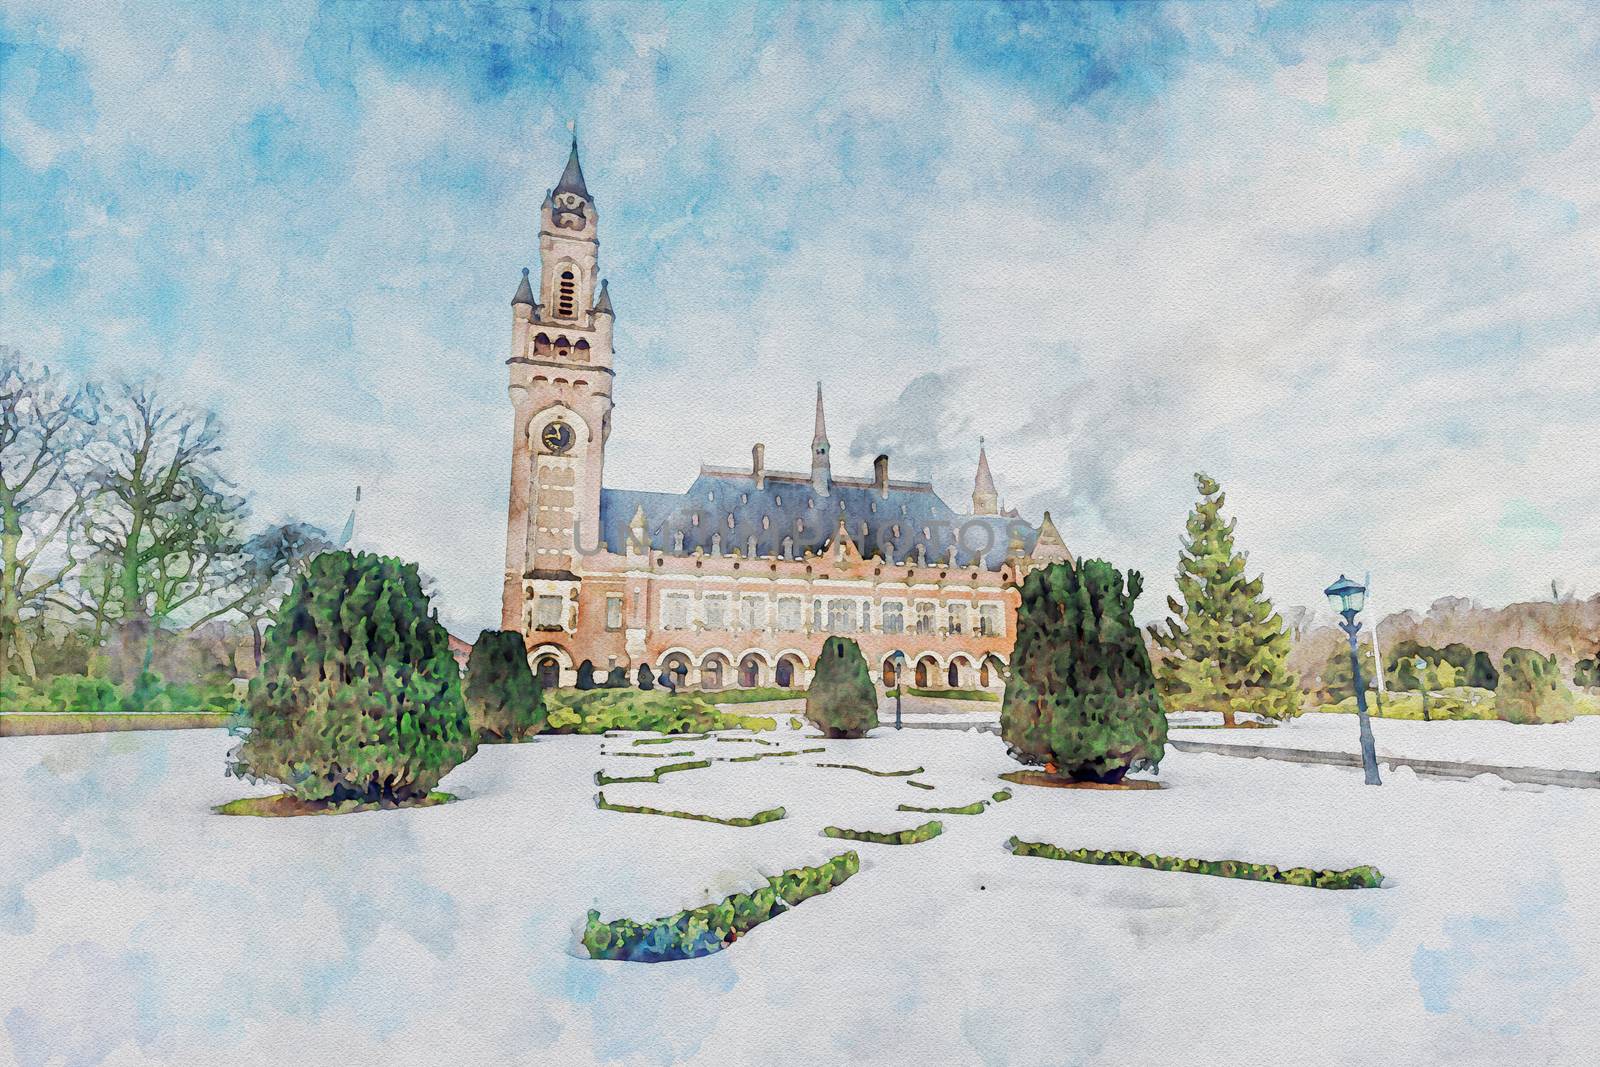 Computer filtered picture imitating watercolor painting of the Peace Palace, Seat of the International Court of Justice in The Hague, Netherlands by ankorlight